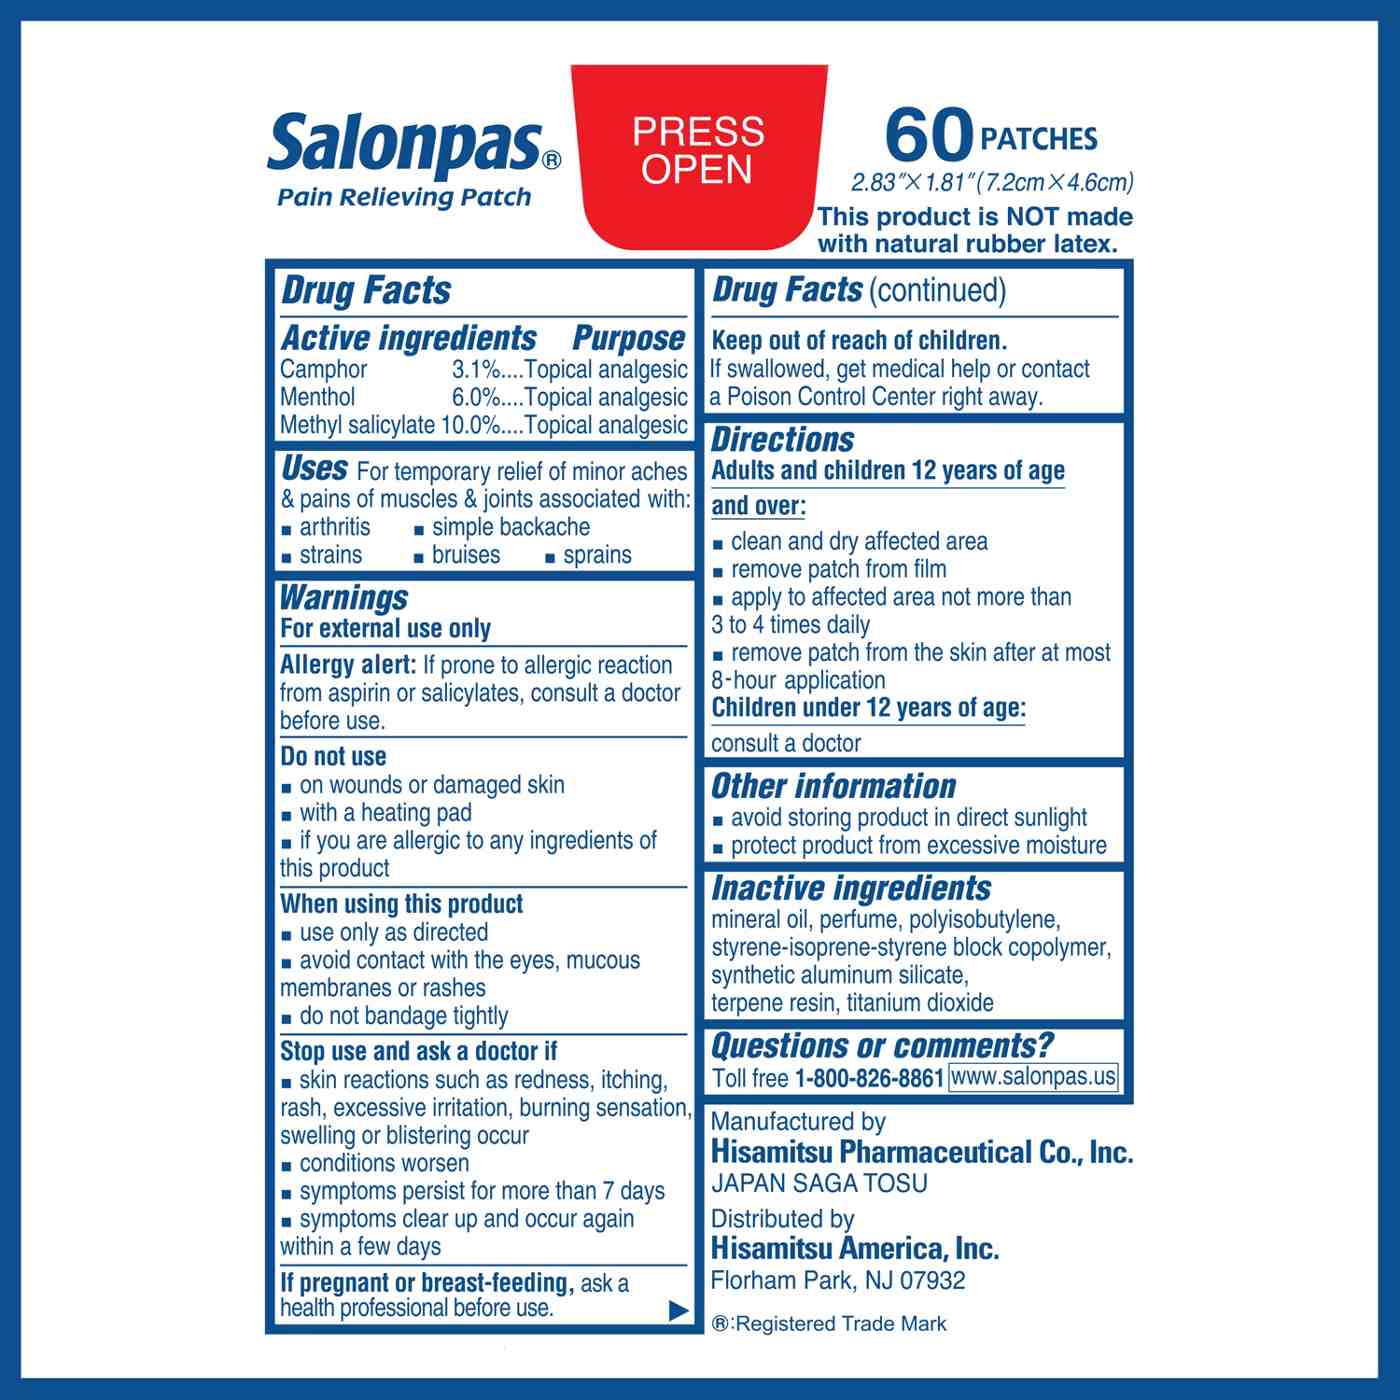 Salonpas Pain Relieving Patch; image 2 of 6